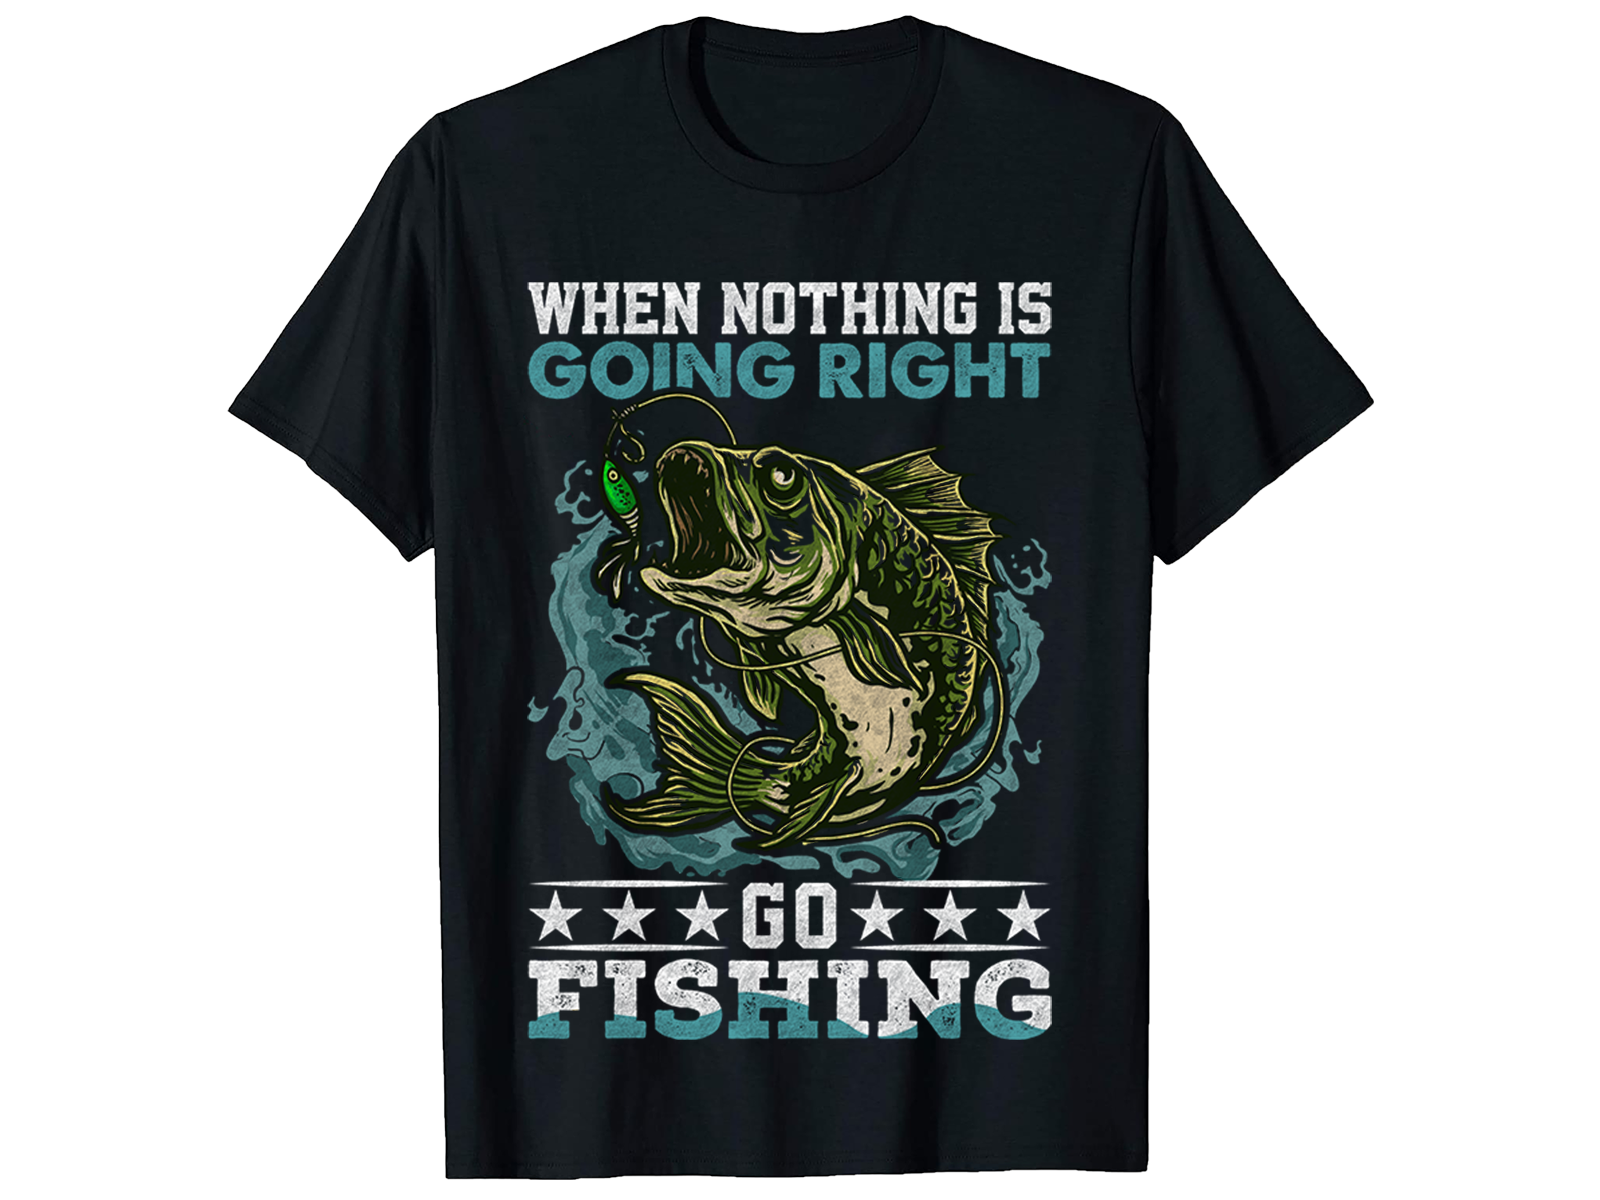 When Nothing Is Going Right, Fishing T-Shirt Design. by Urmi Meghla on ...